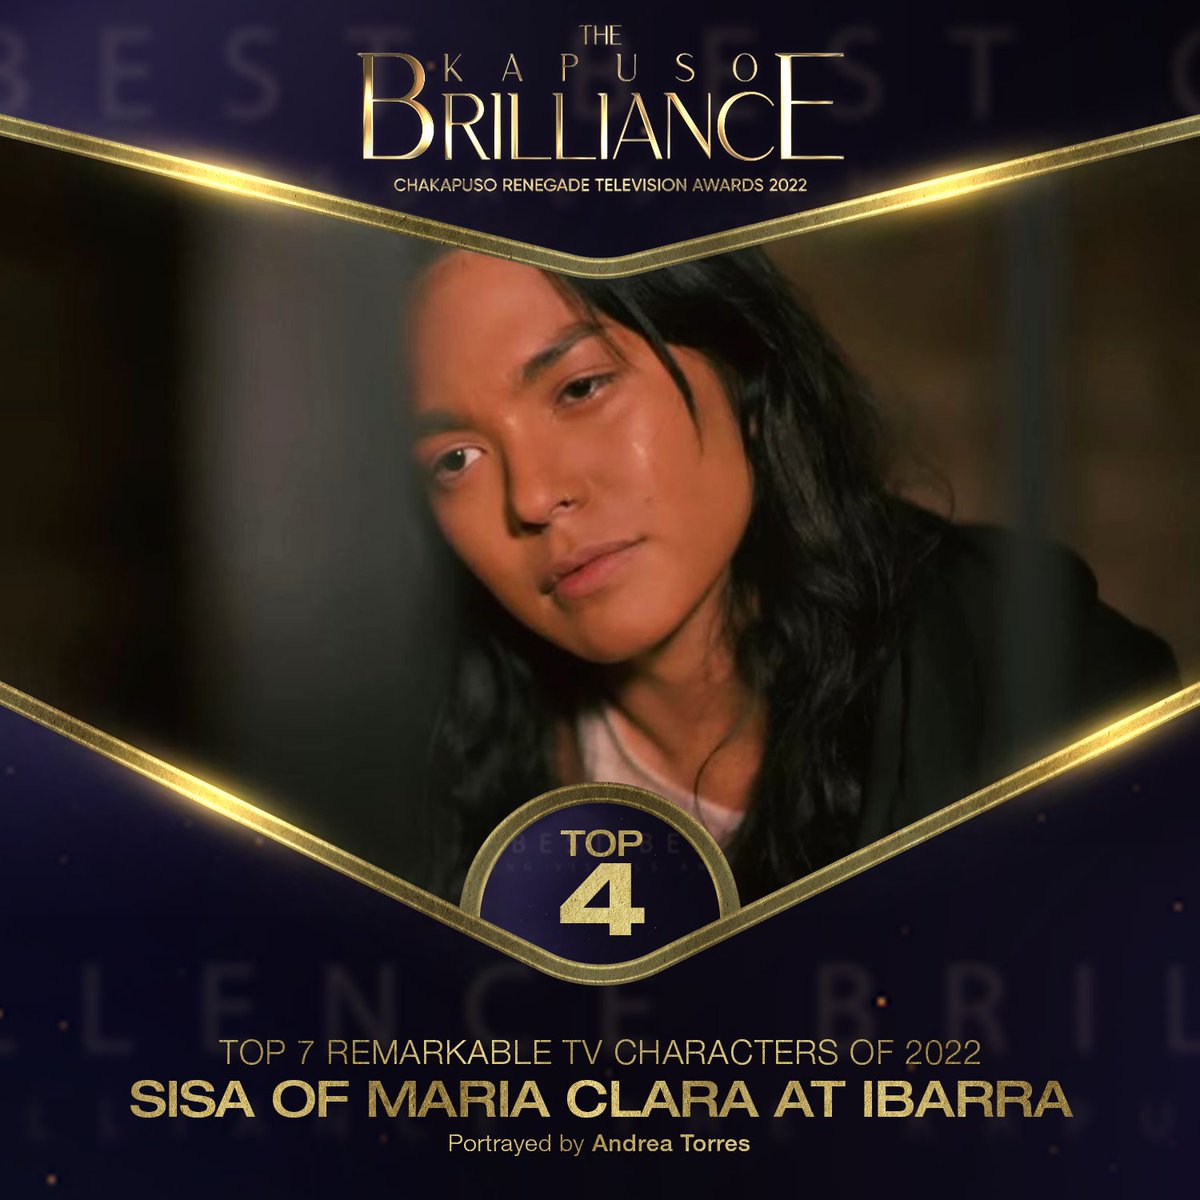 TOP 4: Sisa of #MariaClaraAtIbarra 

The iconic Sisa from Jose Rizal's novel made a modern-day comeback in the television series Maria Clara at Ibarra, and with @andreaetorres in the role, viewers enjoy every moment of it.